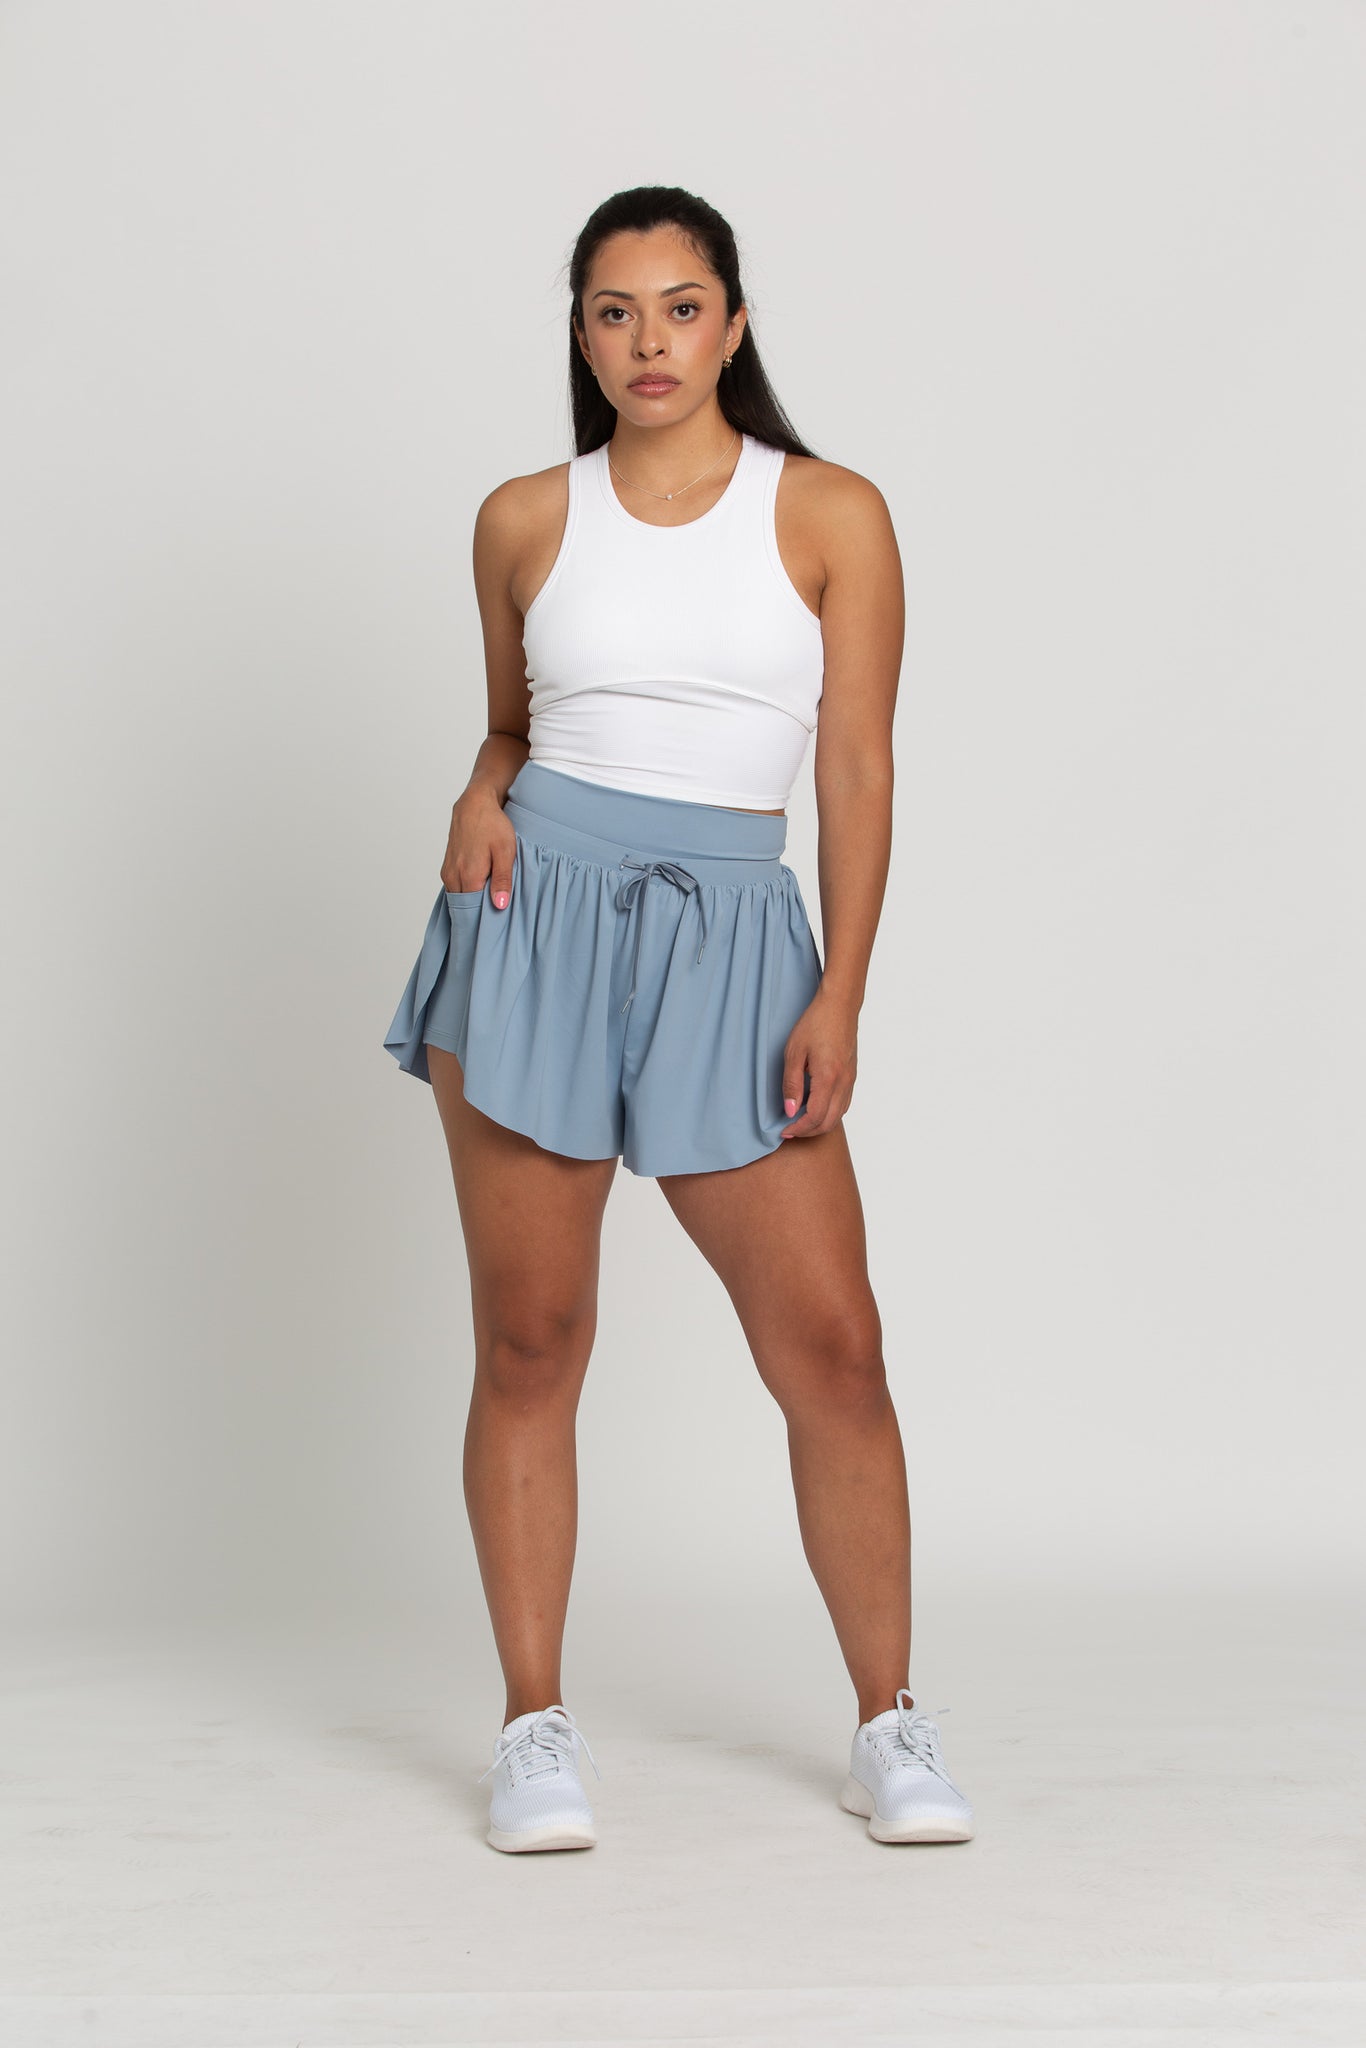 Echo Blue Go-with-the-Flow Athletic Shorts